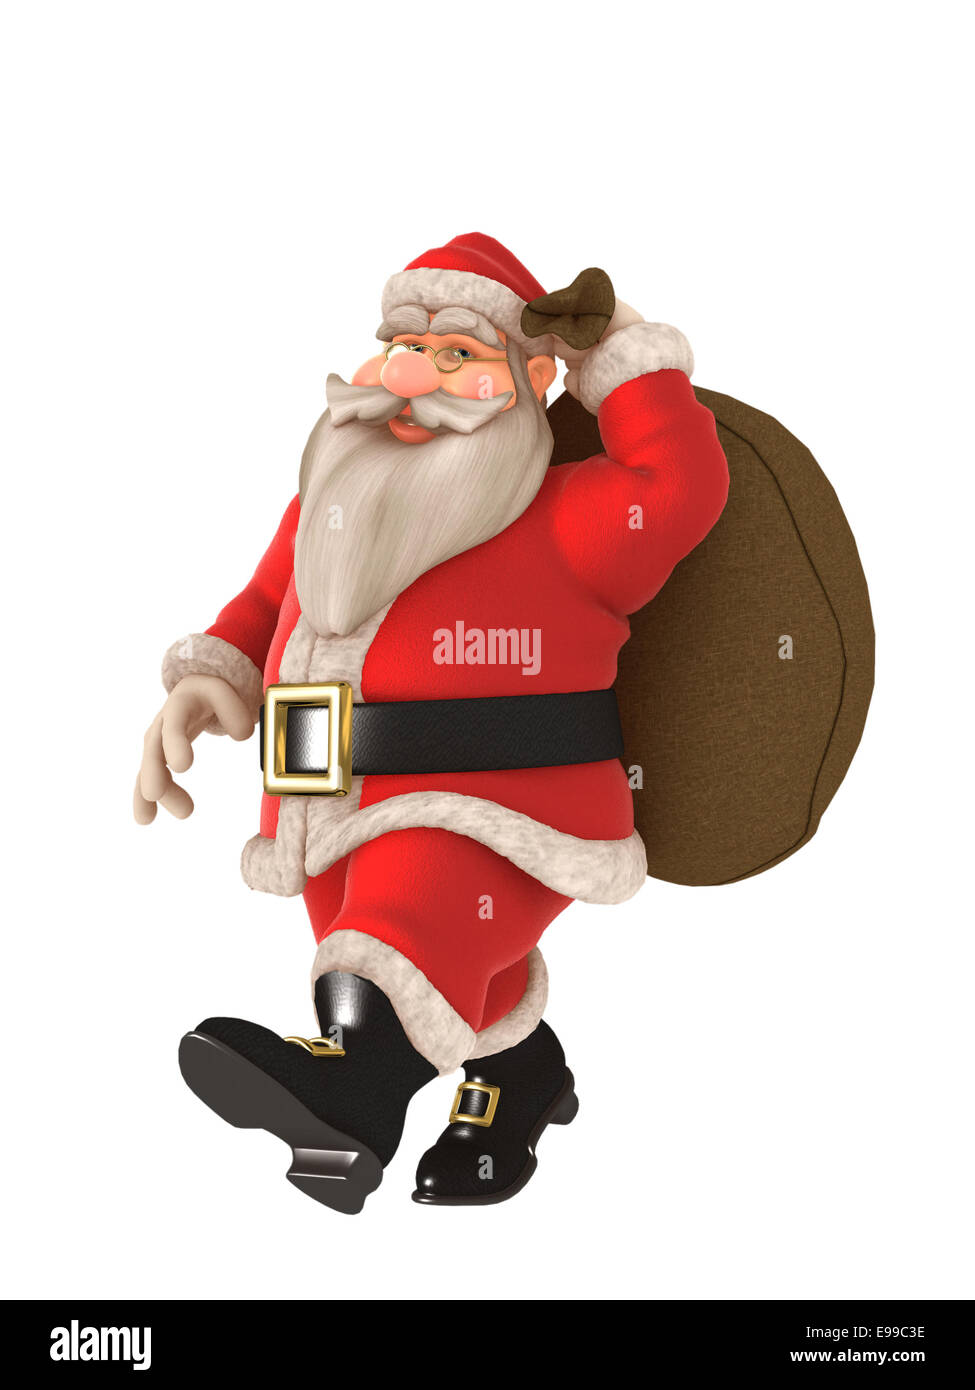 Toon Santa with twinkling eyes and glasses carrying toy sack Stock Photo